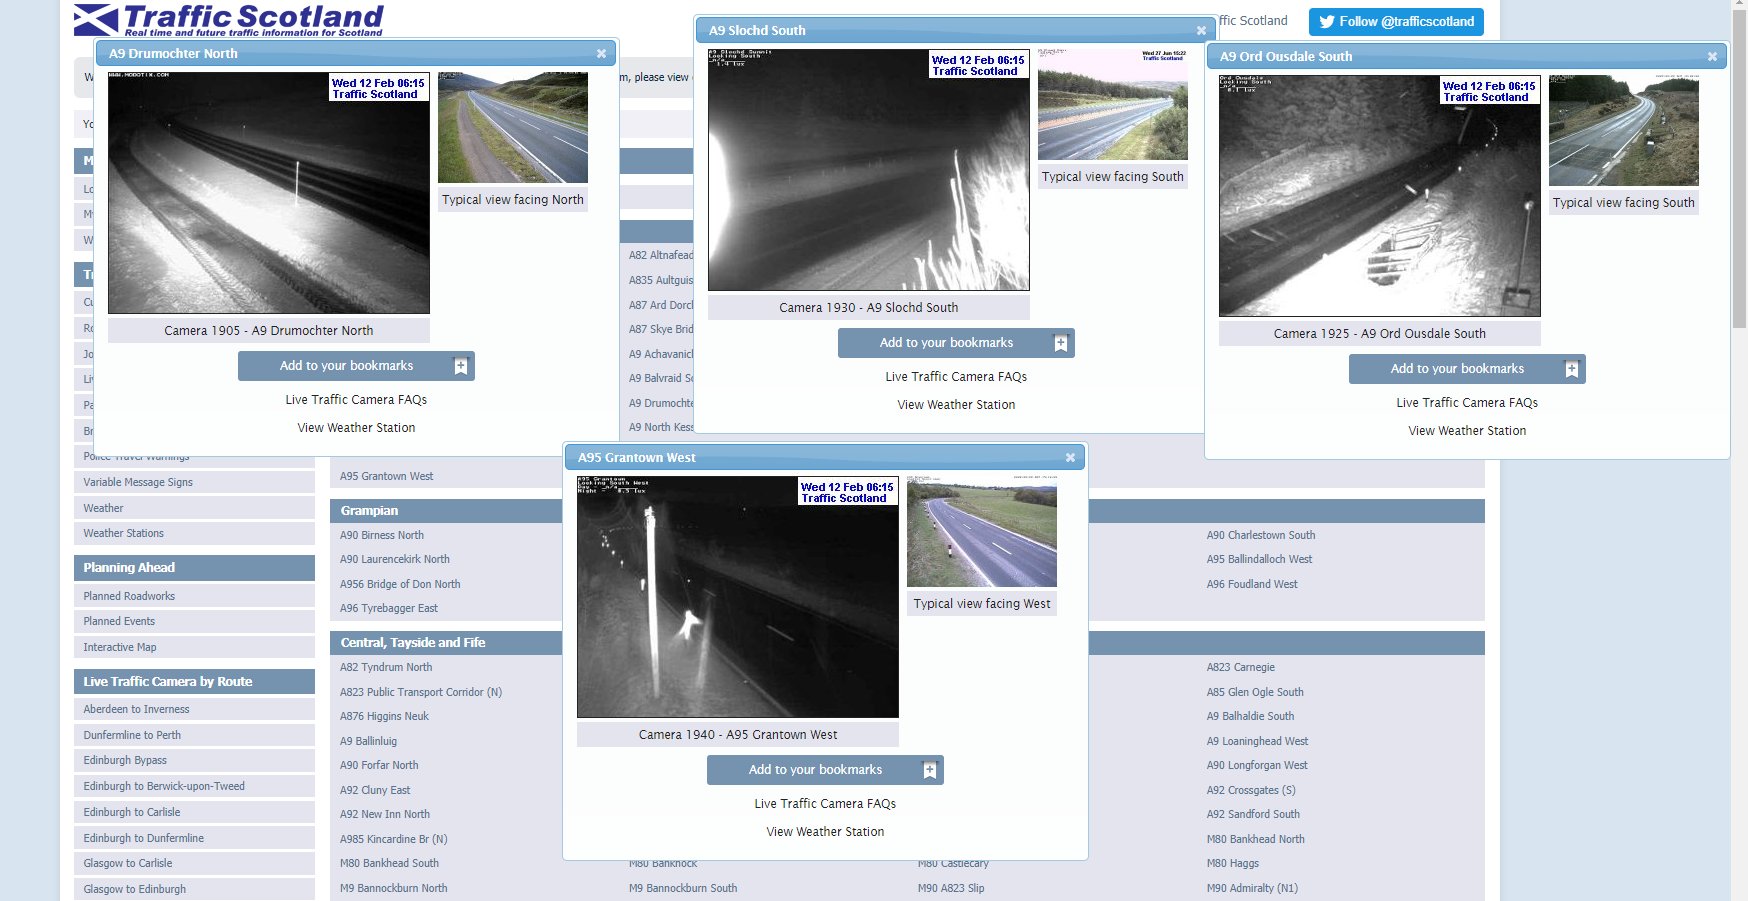 Traffic Scotland's cameras showing snow covering several main roads in the north.